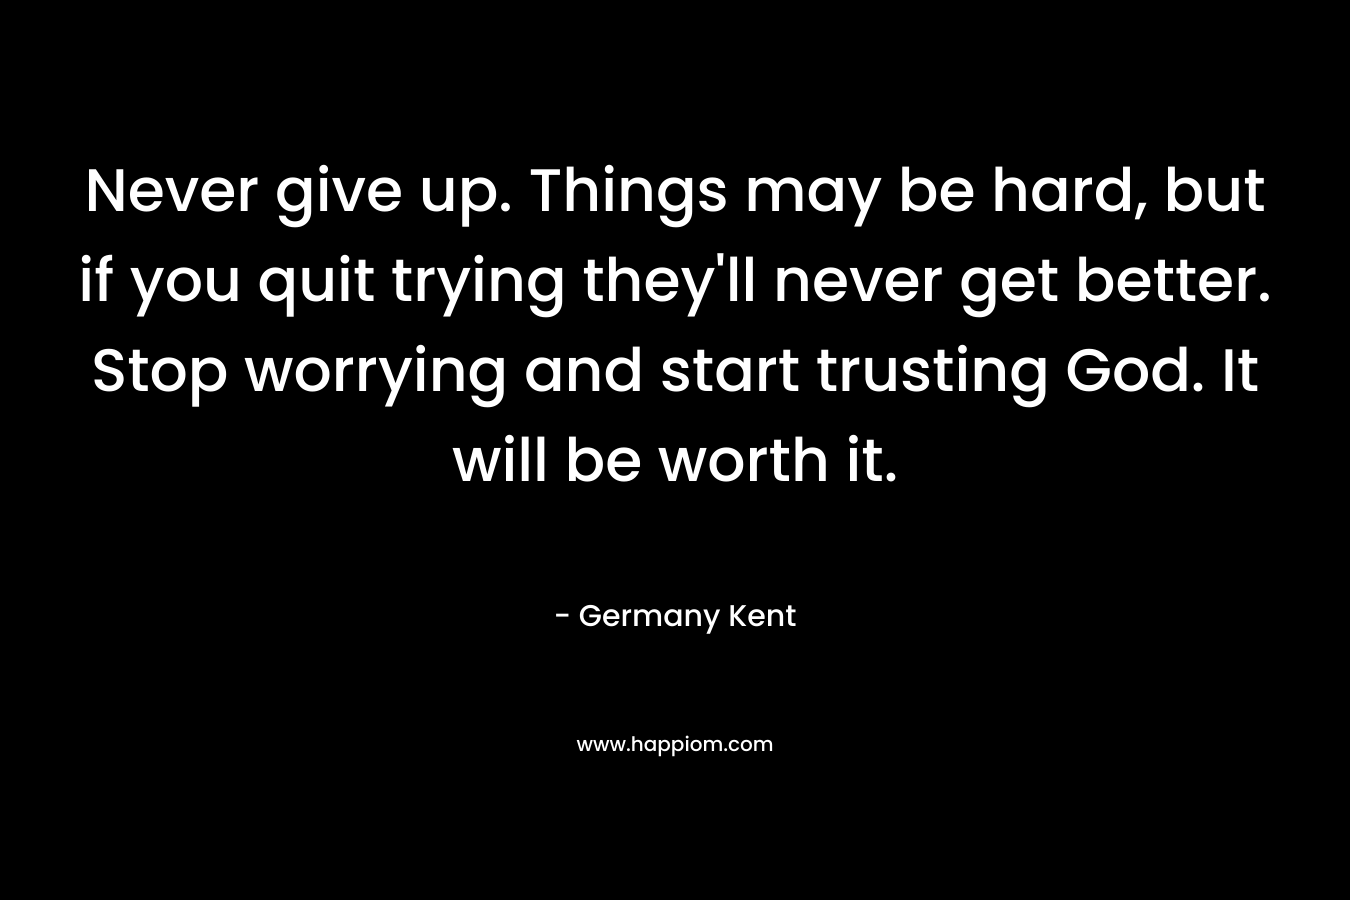 Never give up. Things may be hard, but if you quit trying they'll never get better. Stop worrying and start trusting God. It will be worth it.